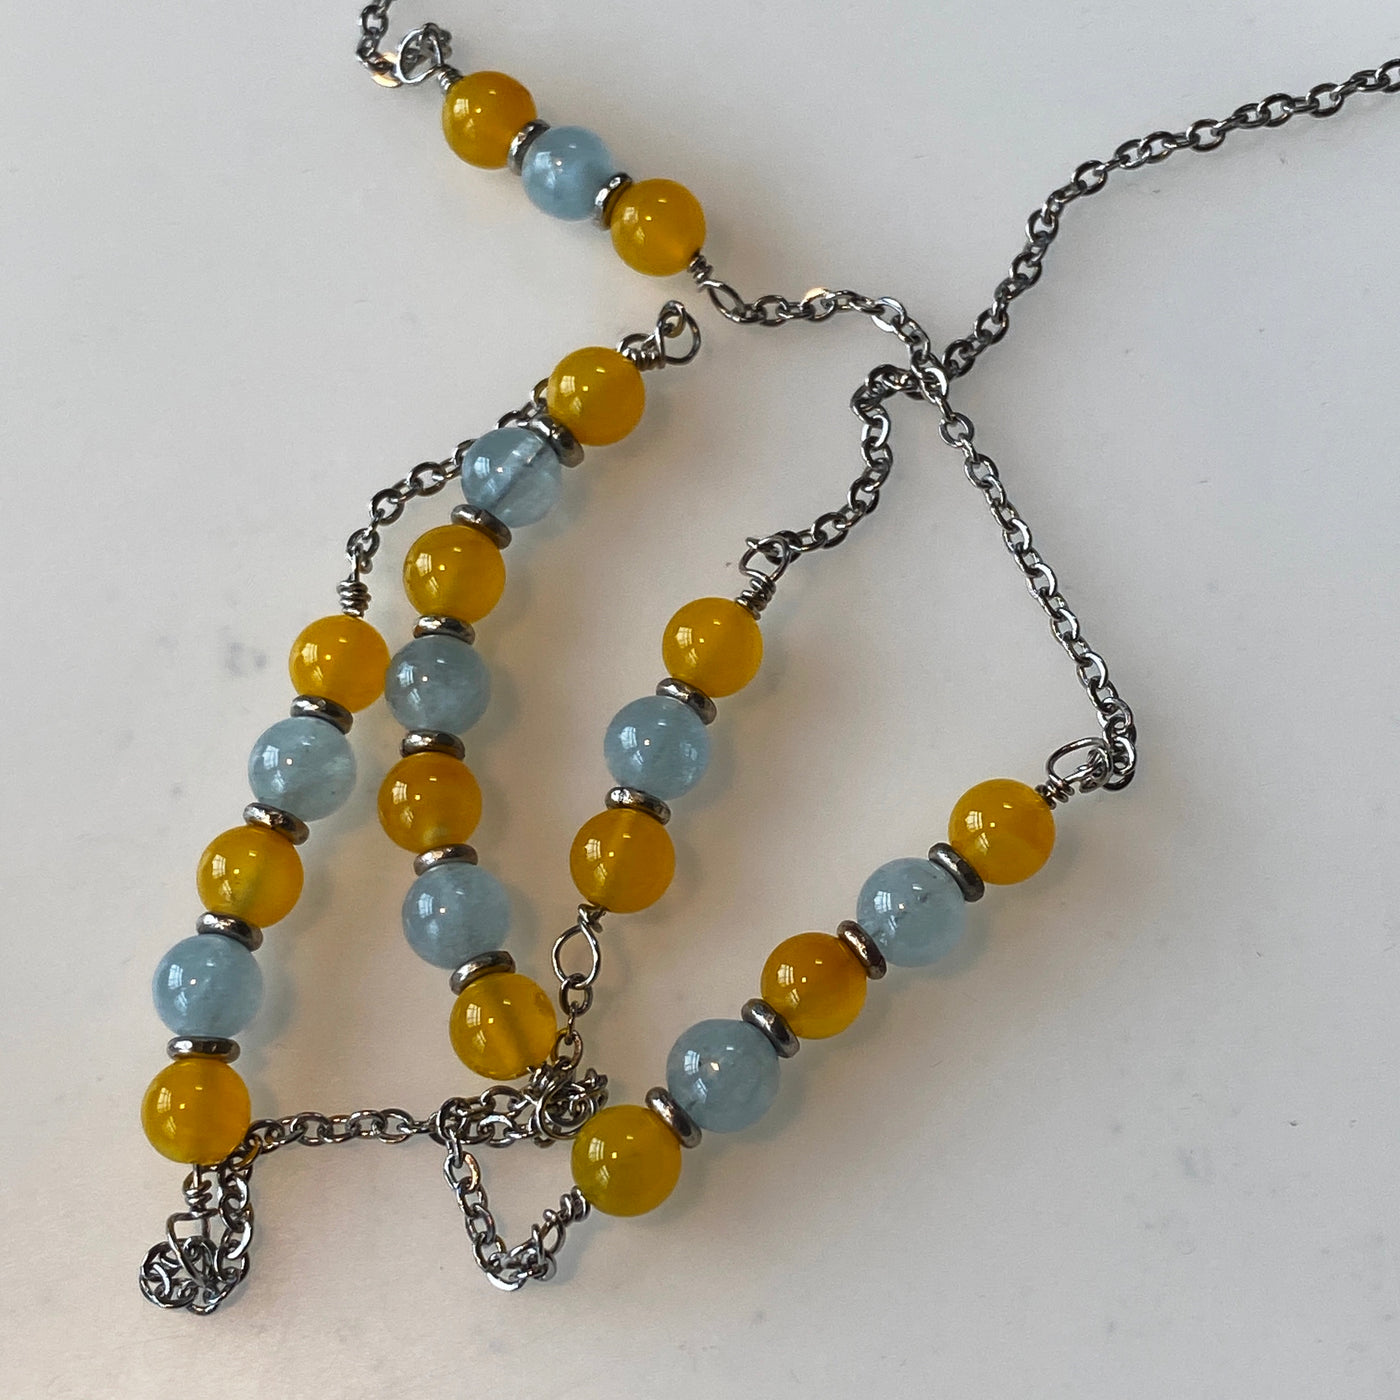 Yellow agate, acquamarine and silver on silver chain necklace. Lines.